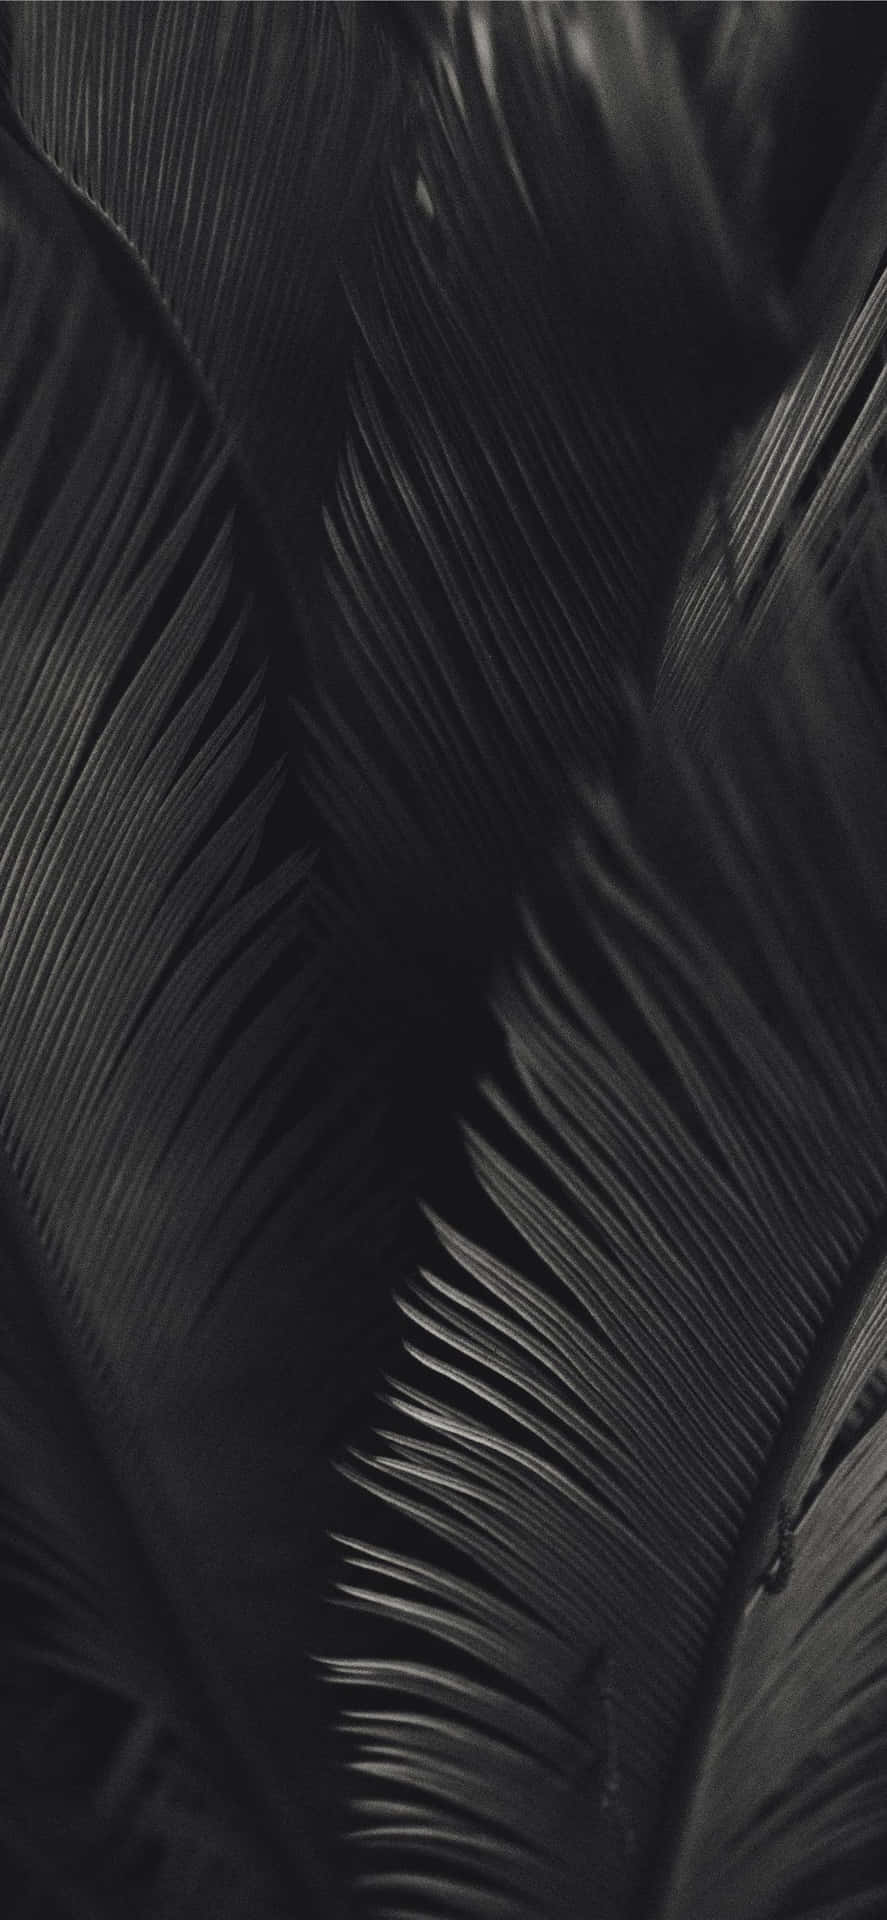 The sophisticated black finish of the latest Apple Iphone 11 Pro Wallpaper